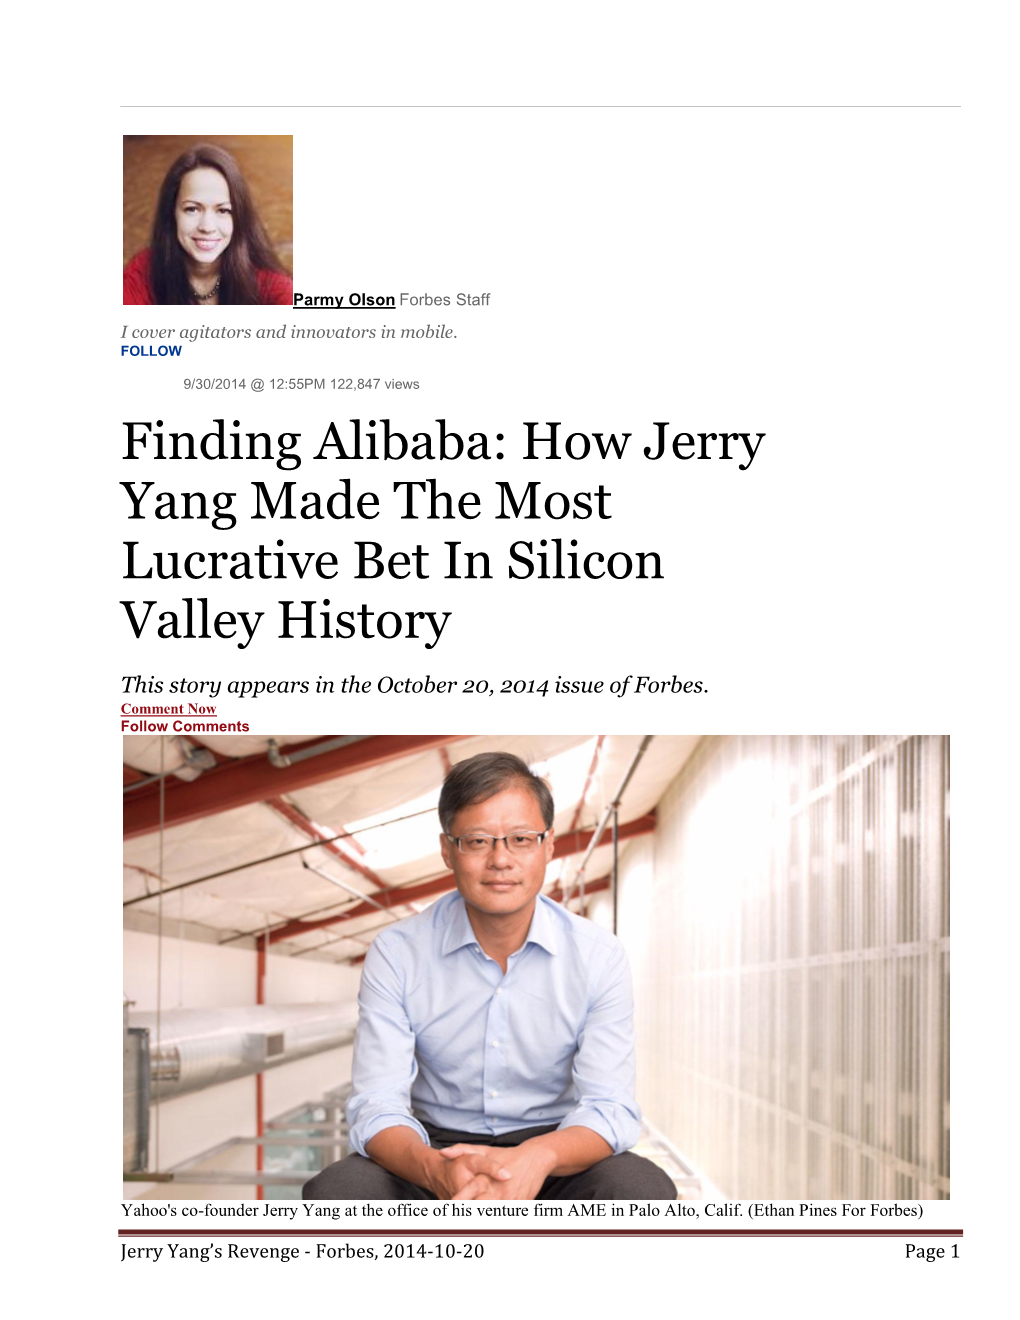 Finding Alibaba: How Jerry Yang Made the Most Lucrative Bet in Silicon Valley History